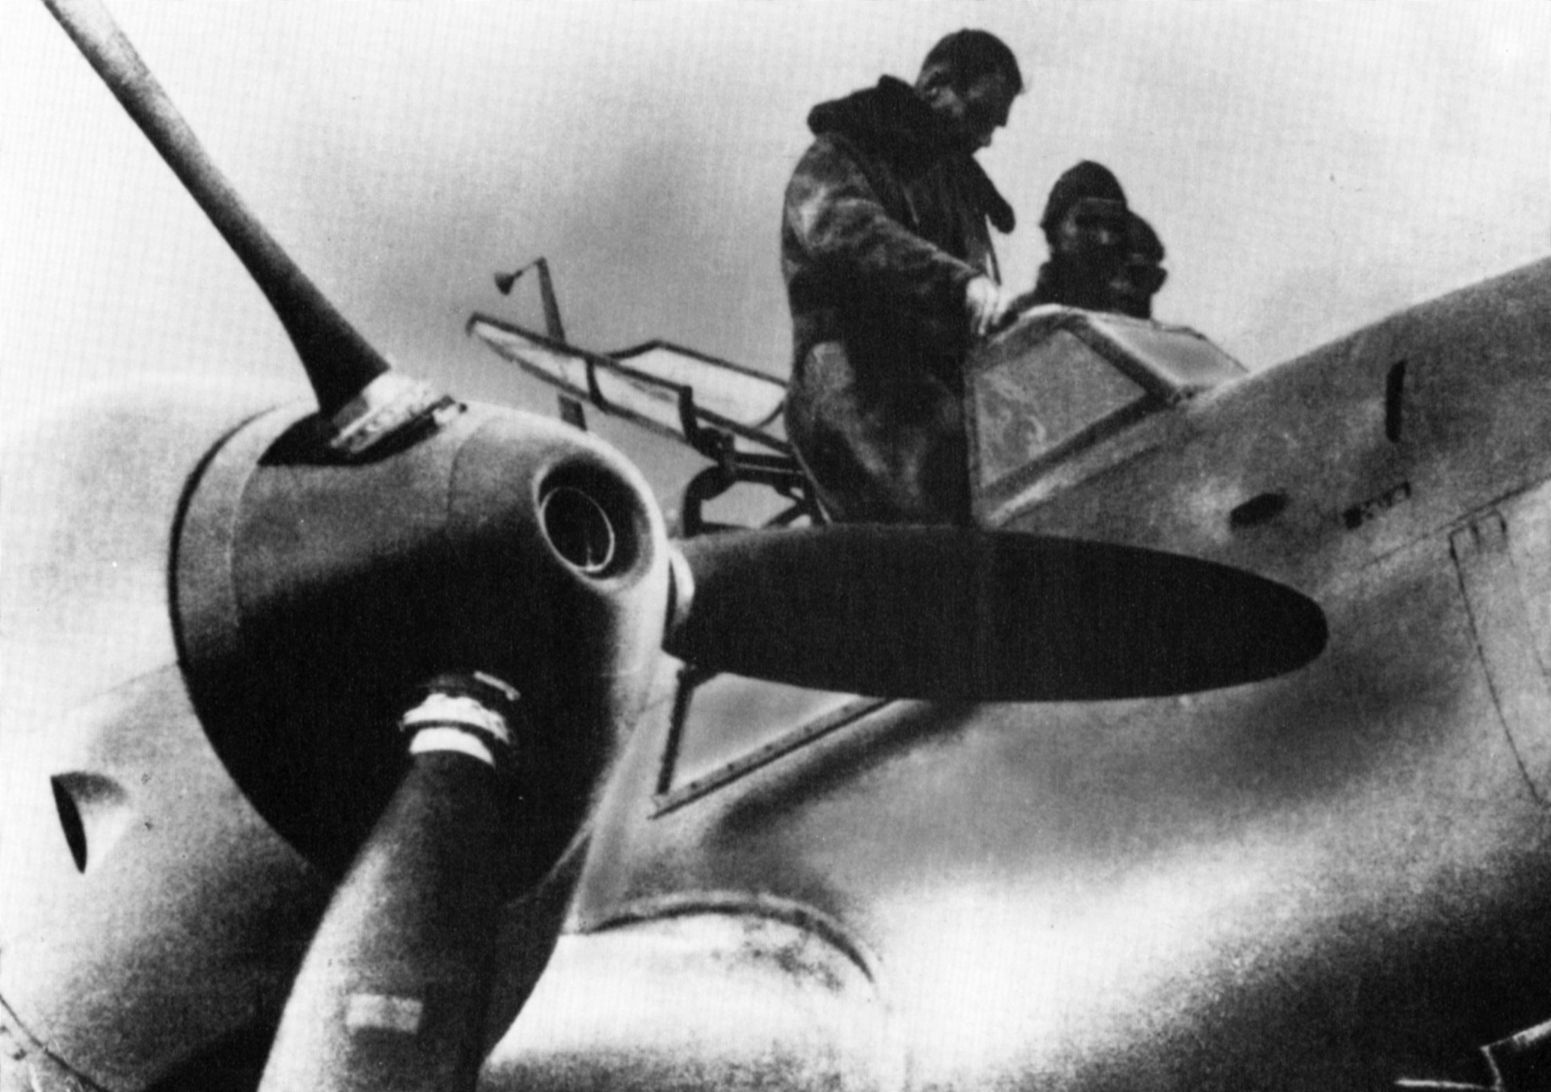 Prior to taking off for a practice flight, Rudolf Hess stands in the cockpit of the Me-110 twin engine fighter he later flew to England during an abortive peace mission.  Hess was jailed for the duration of the war, tried and convicted at Nuremberg, and spent the rest of his life behind bars. (Imperial War Museum)